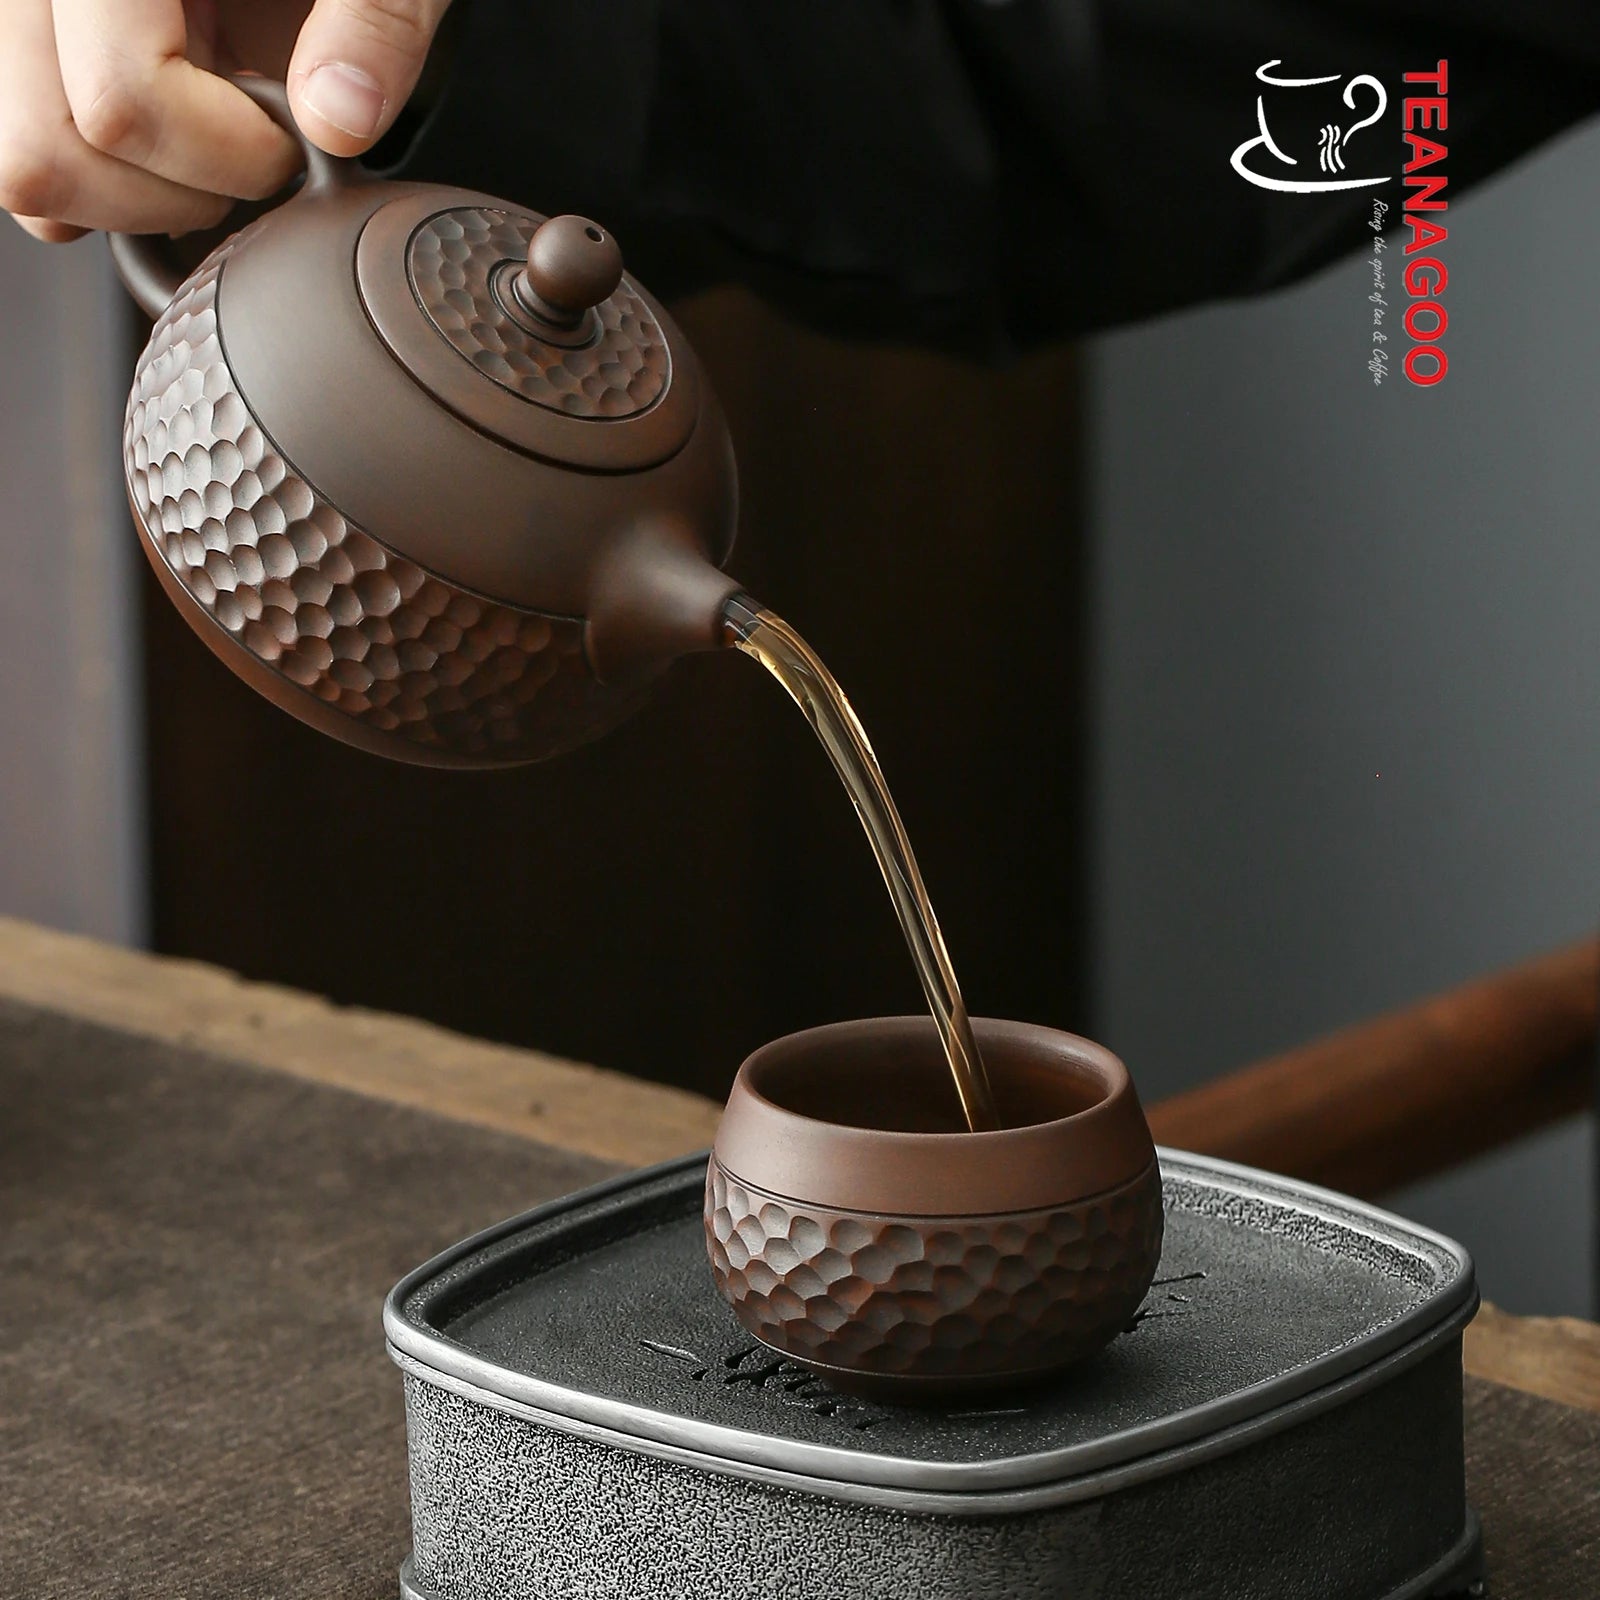 Handcrafted Mellow Clay Teapot Ceramic Gongfu Tea Ware